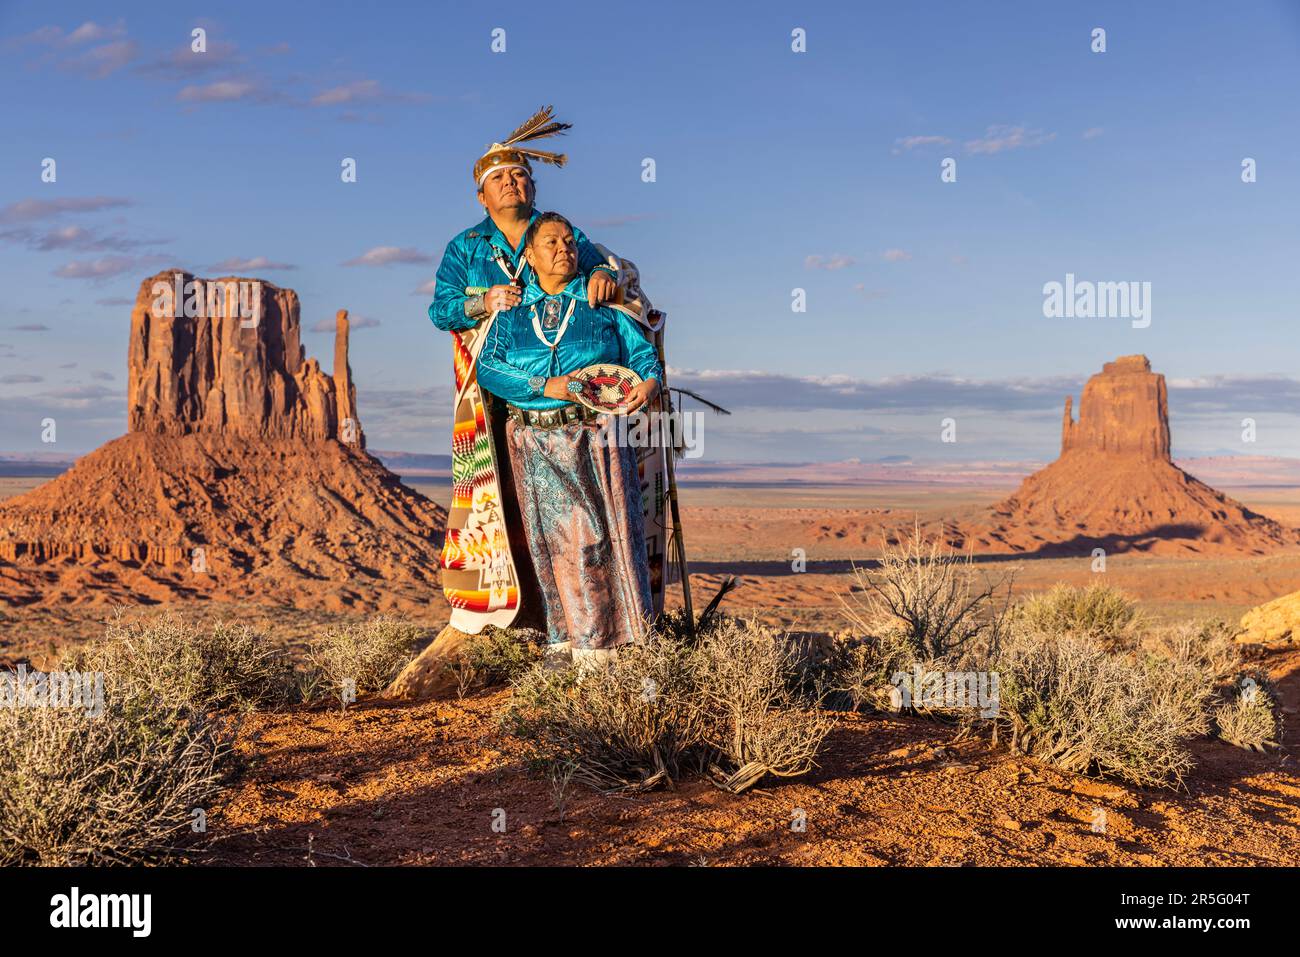 American Indian Navajo couple posing during sunset at Monument Valley Navajo Tribal Park, Arizona, United States Stock Photo